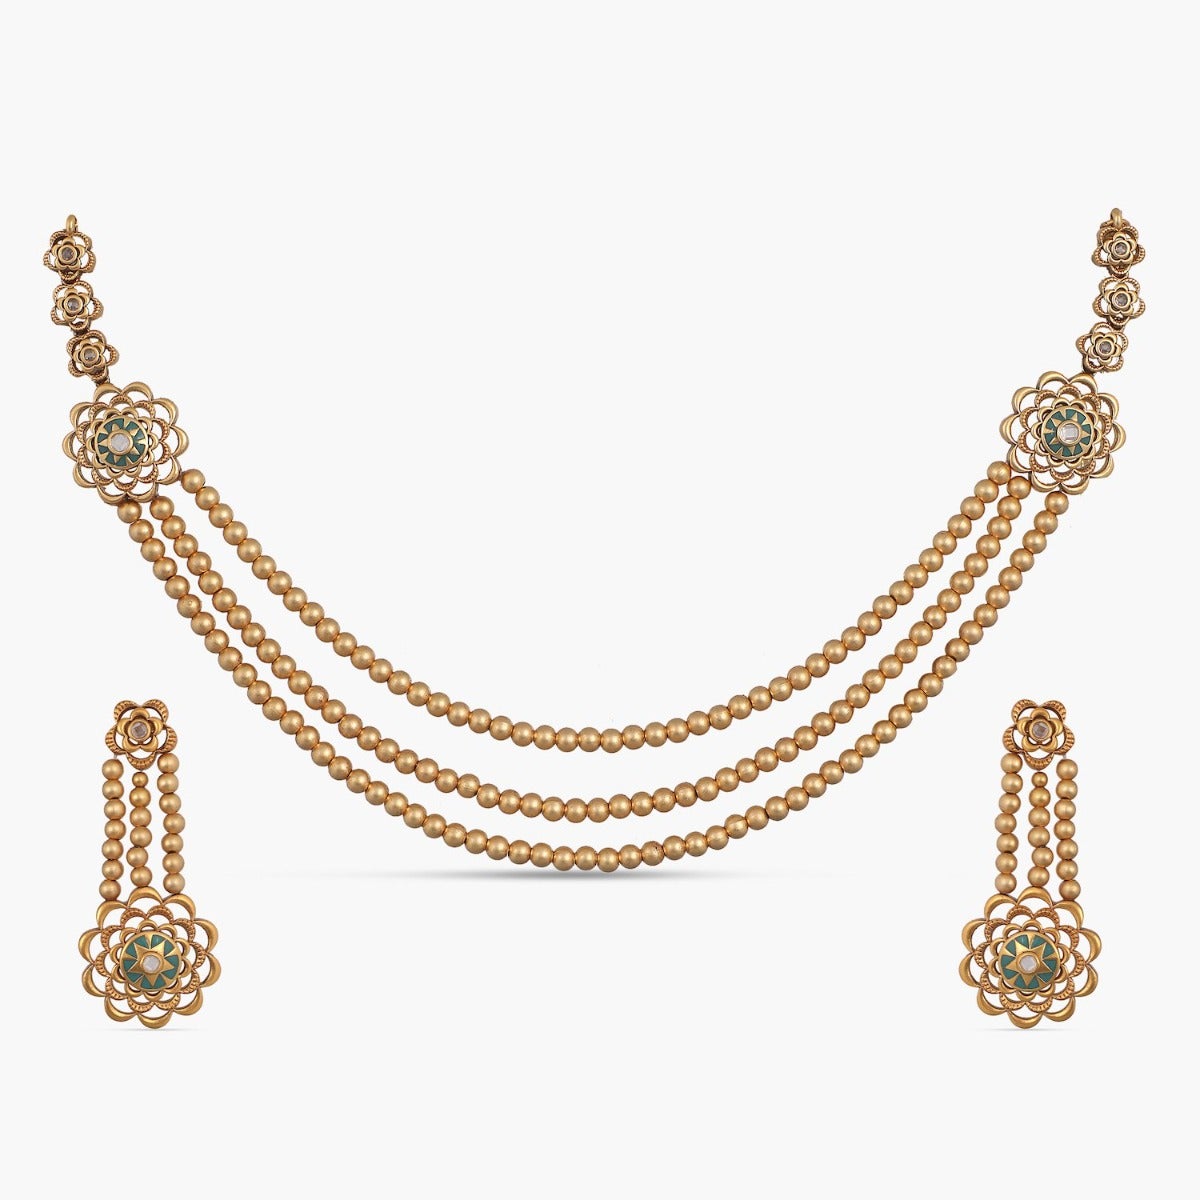 Emerald Bead Necklace (30.930 Gms) set in 22K Yellow Gold | Mohan Jewellery